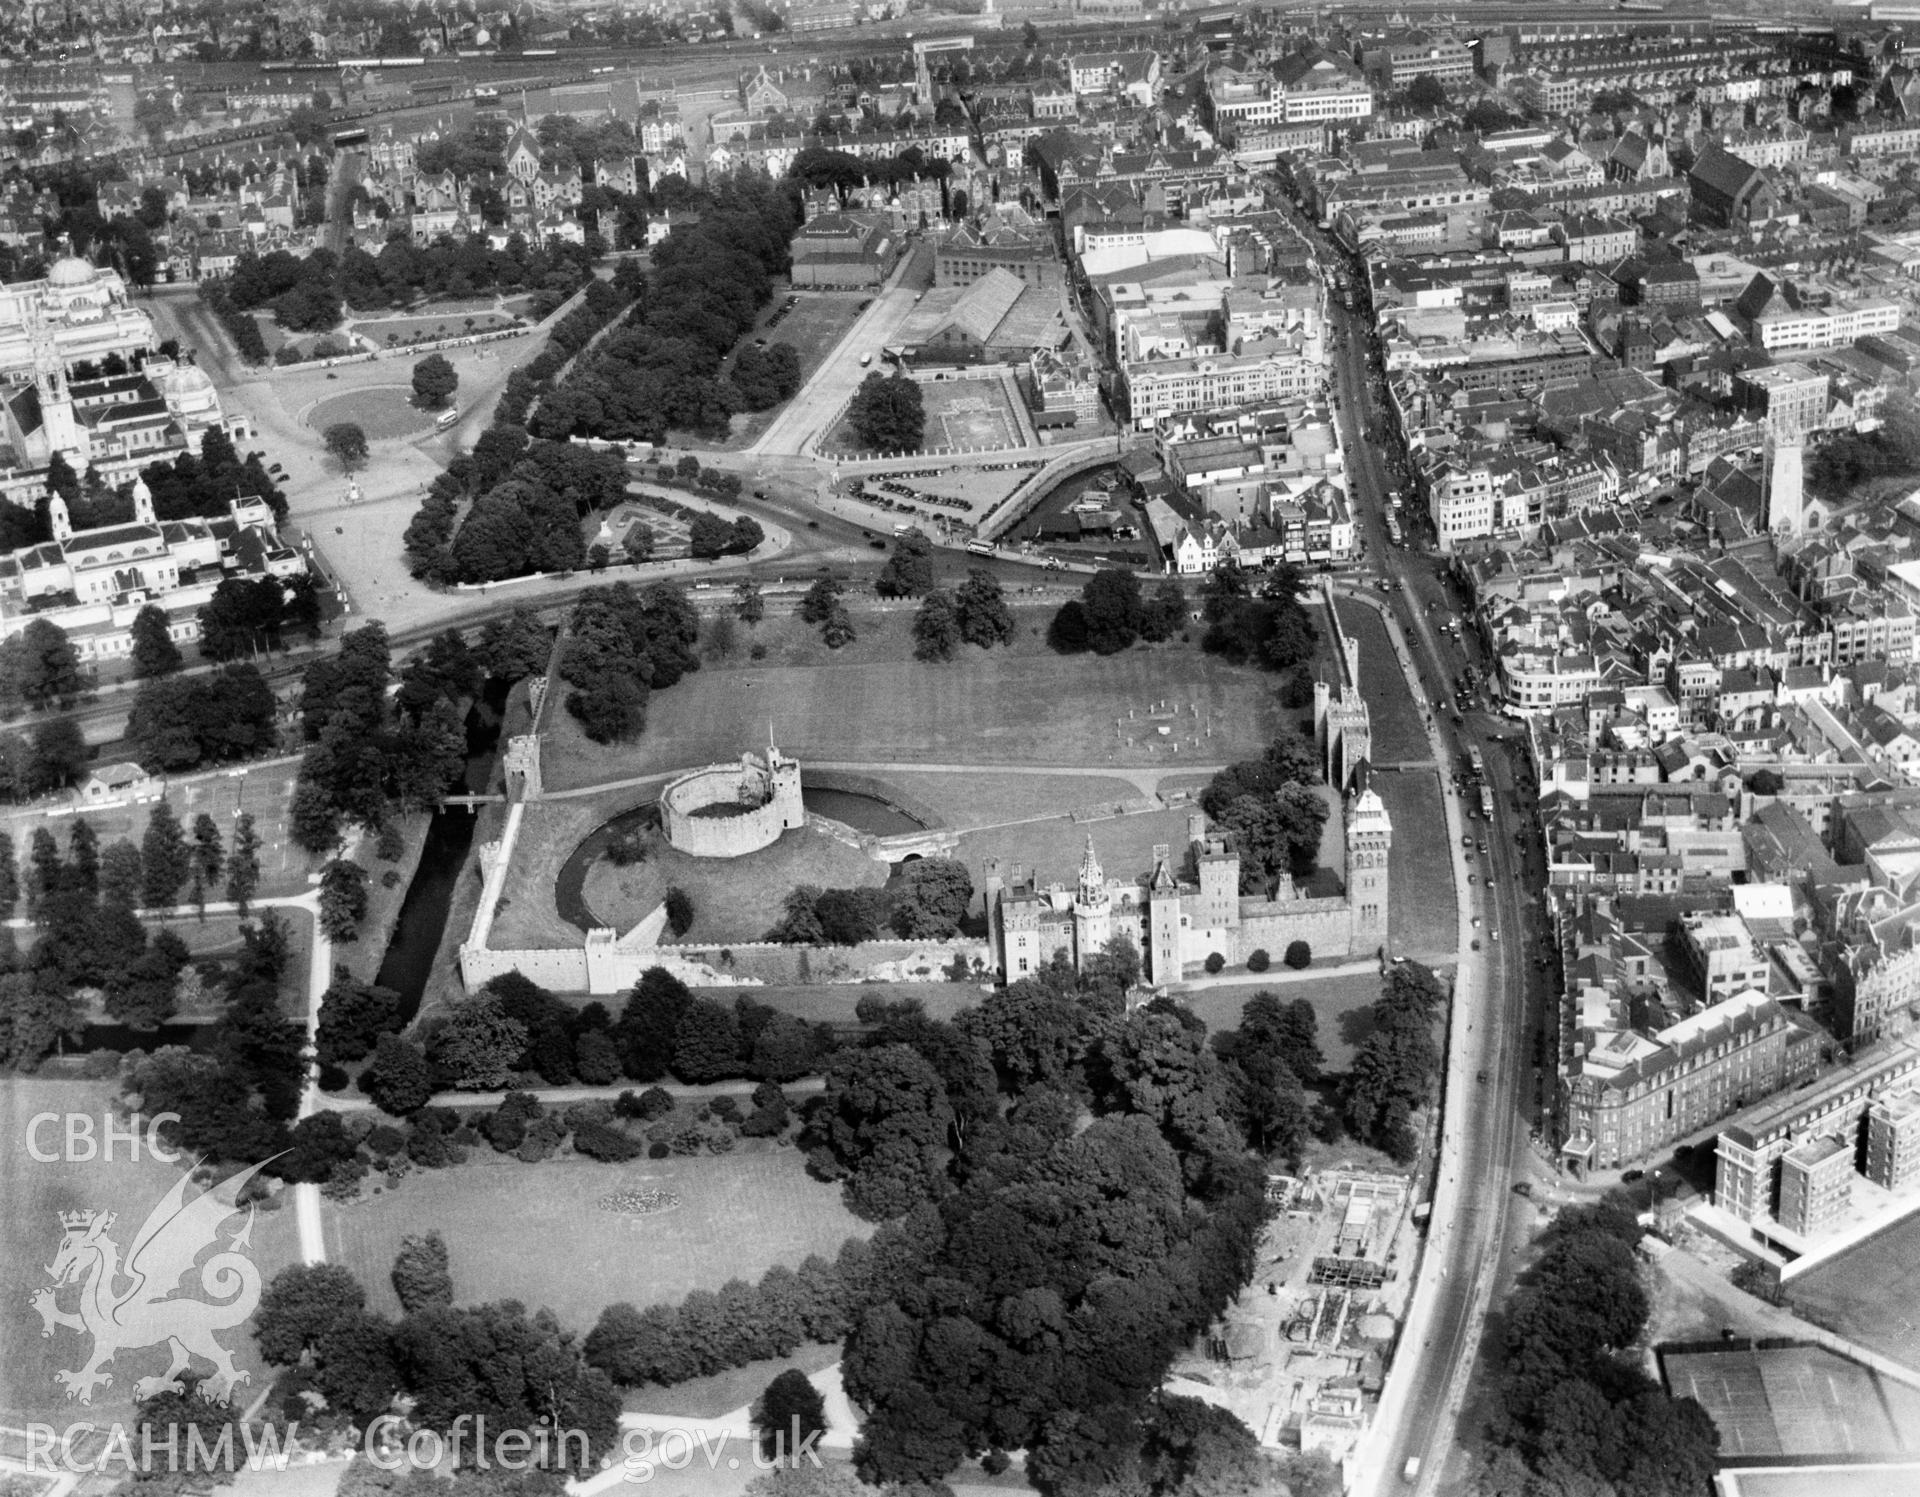 View of central Cardiff showing castle, oblique aerial view. 5?x4? black and white glass plate negative.